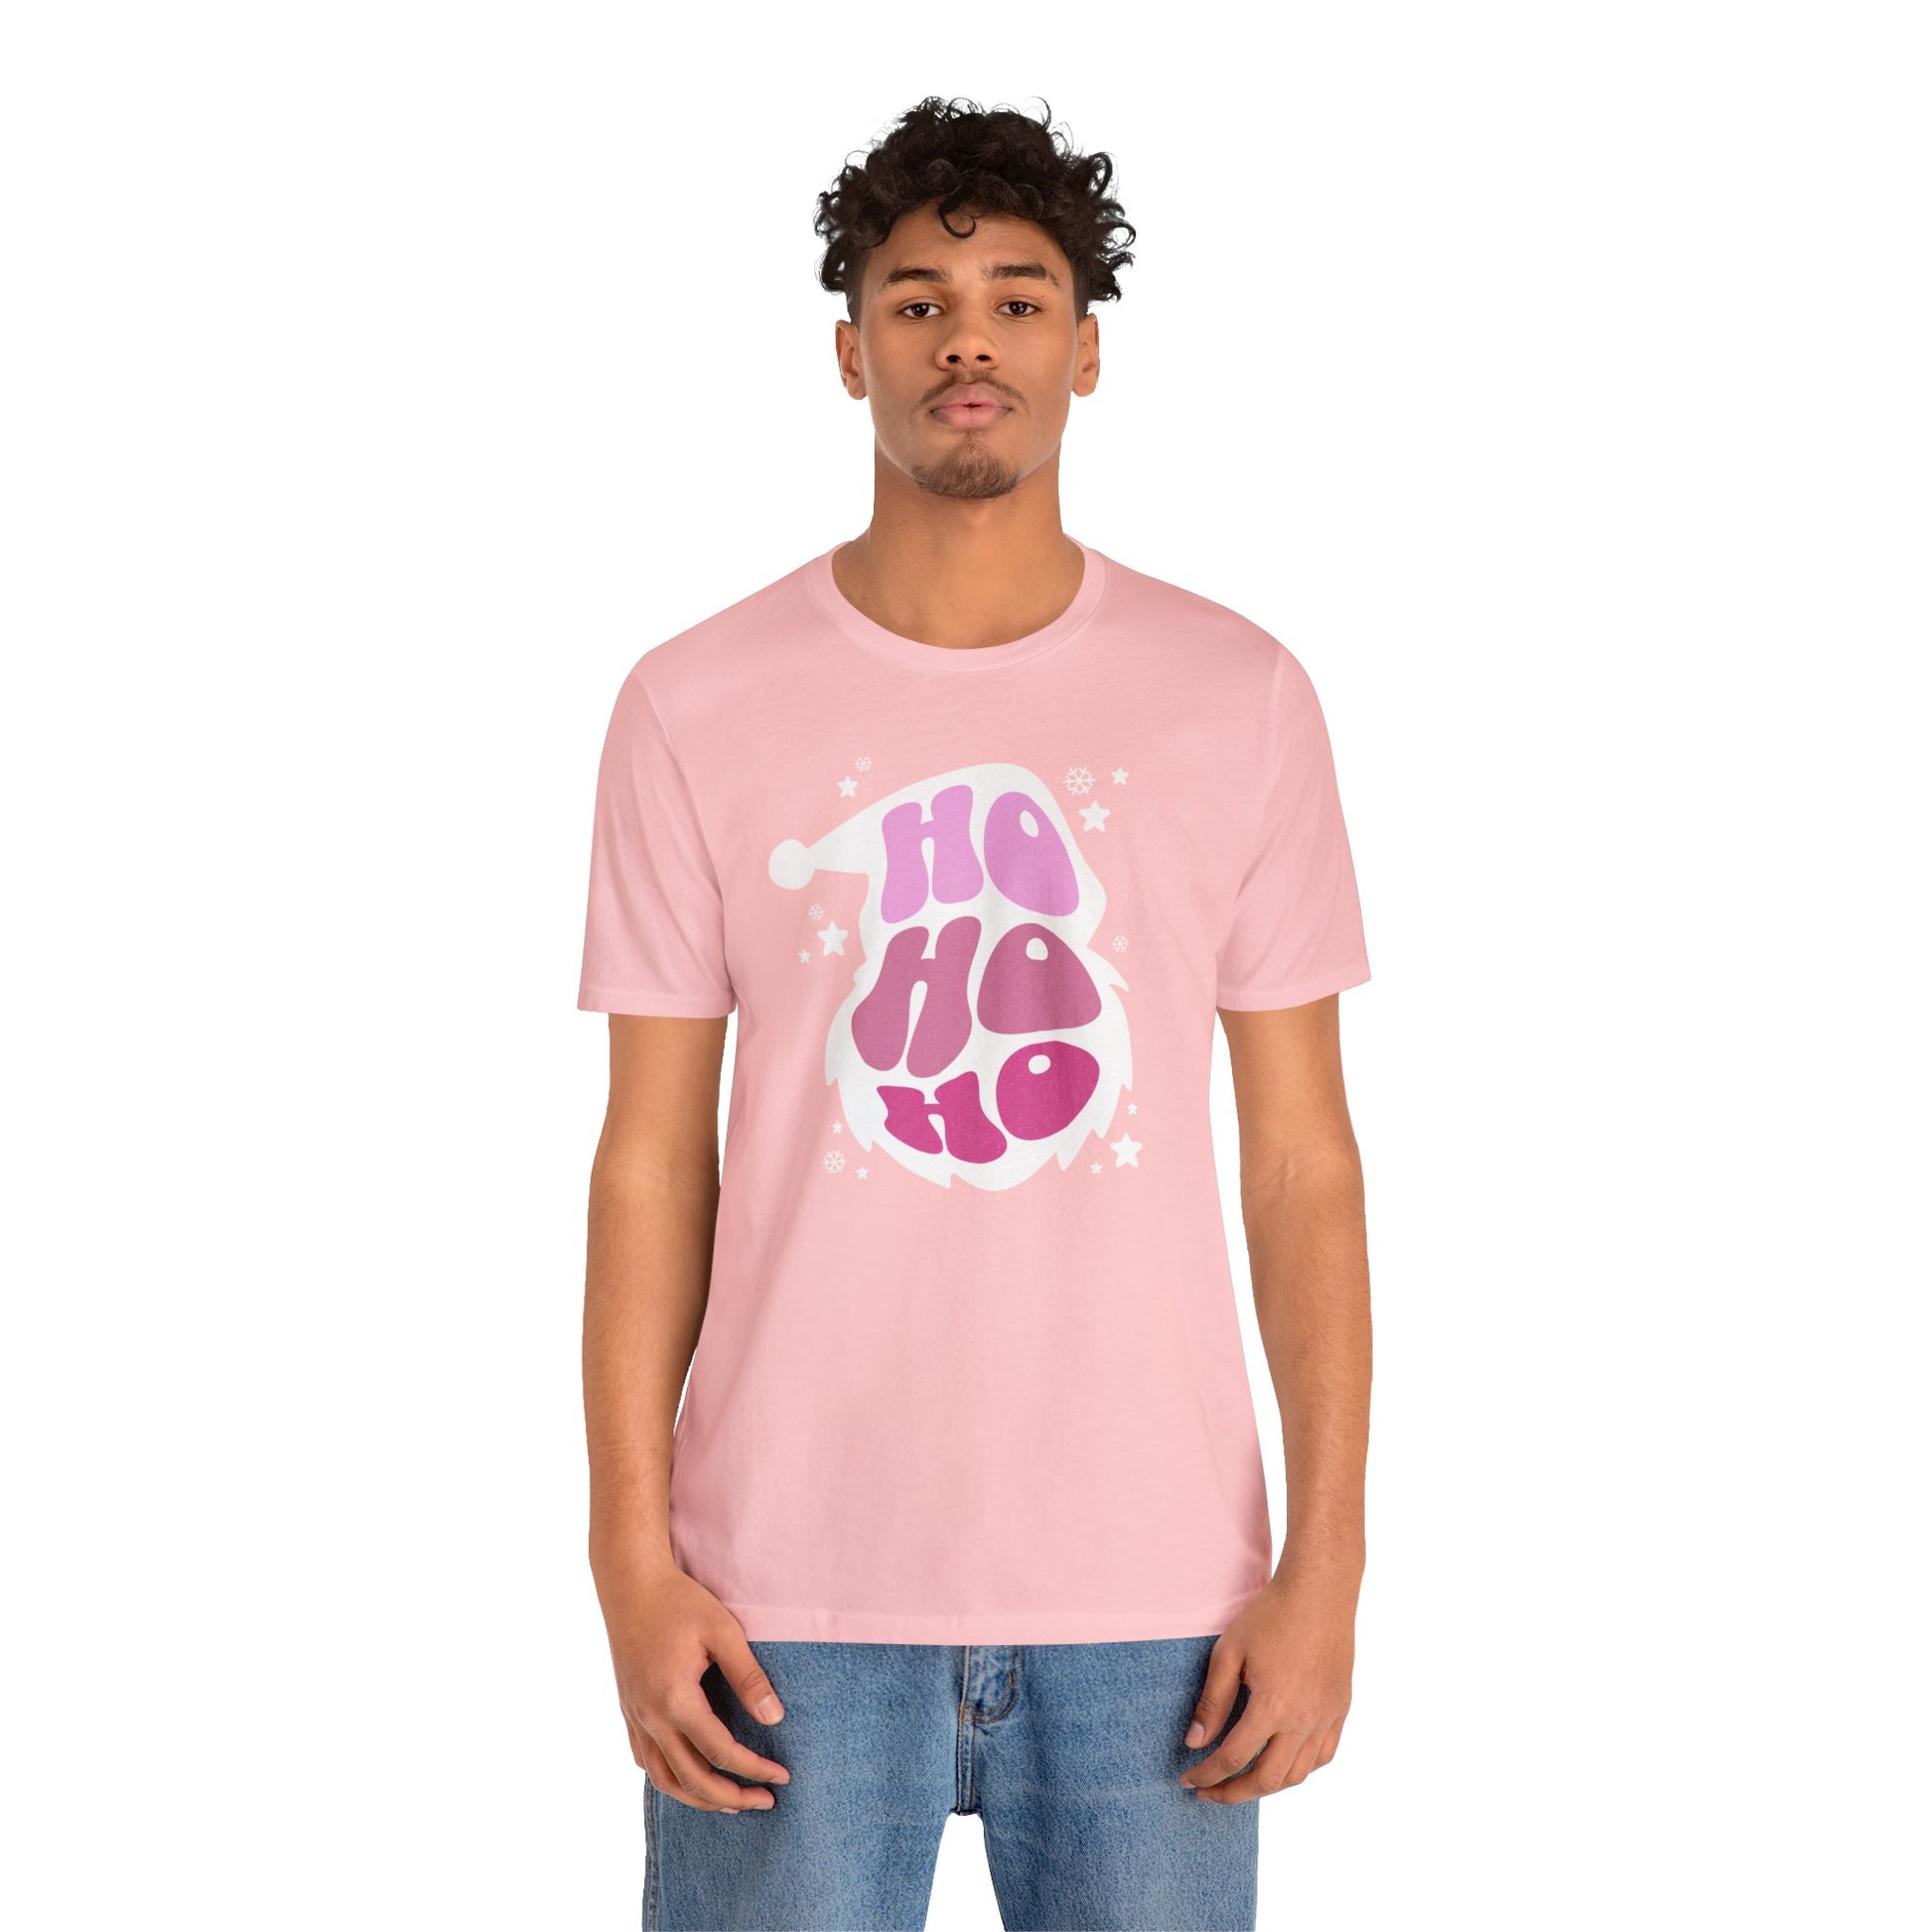 A Printify Unisex Jersey Short Sleeve Tee in pink that says "oh wow".